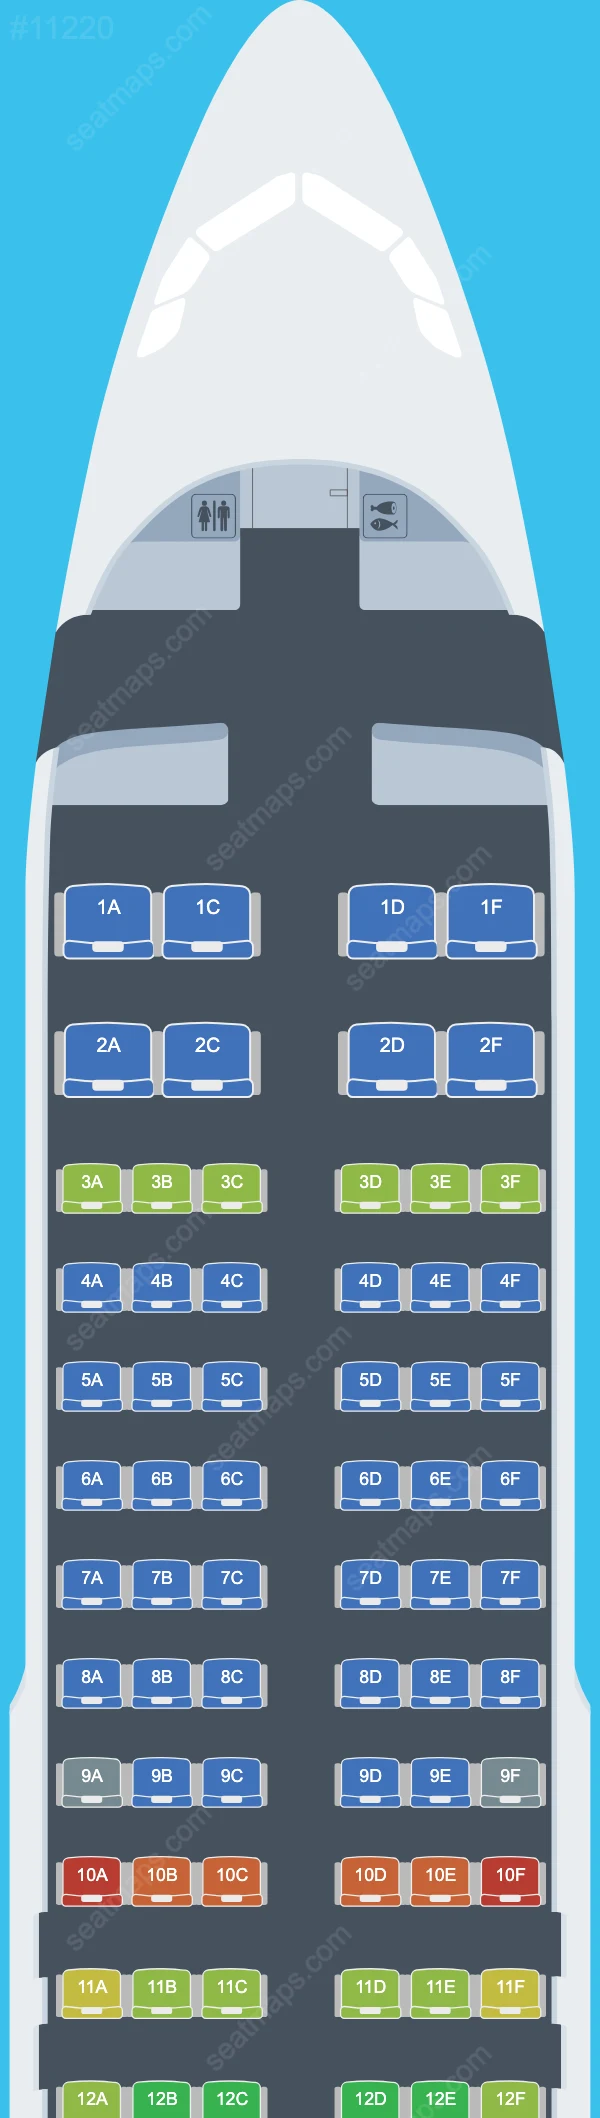 Bamboo Airways Airbus A320-200neo V.1 seatmap preview